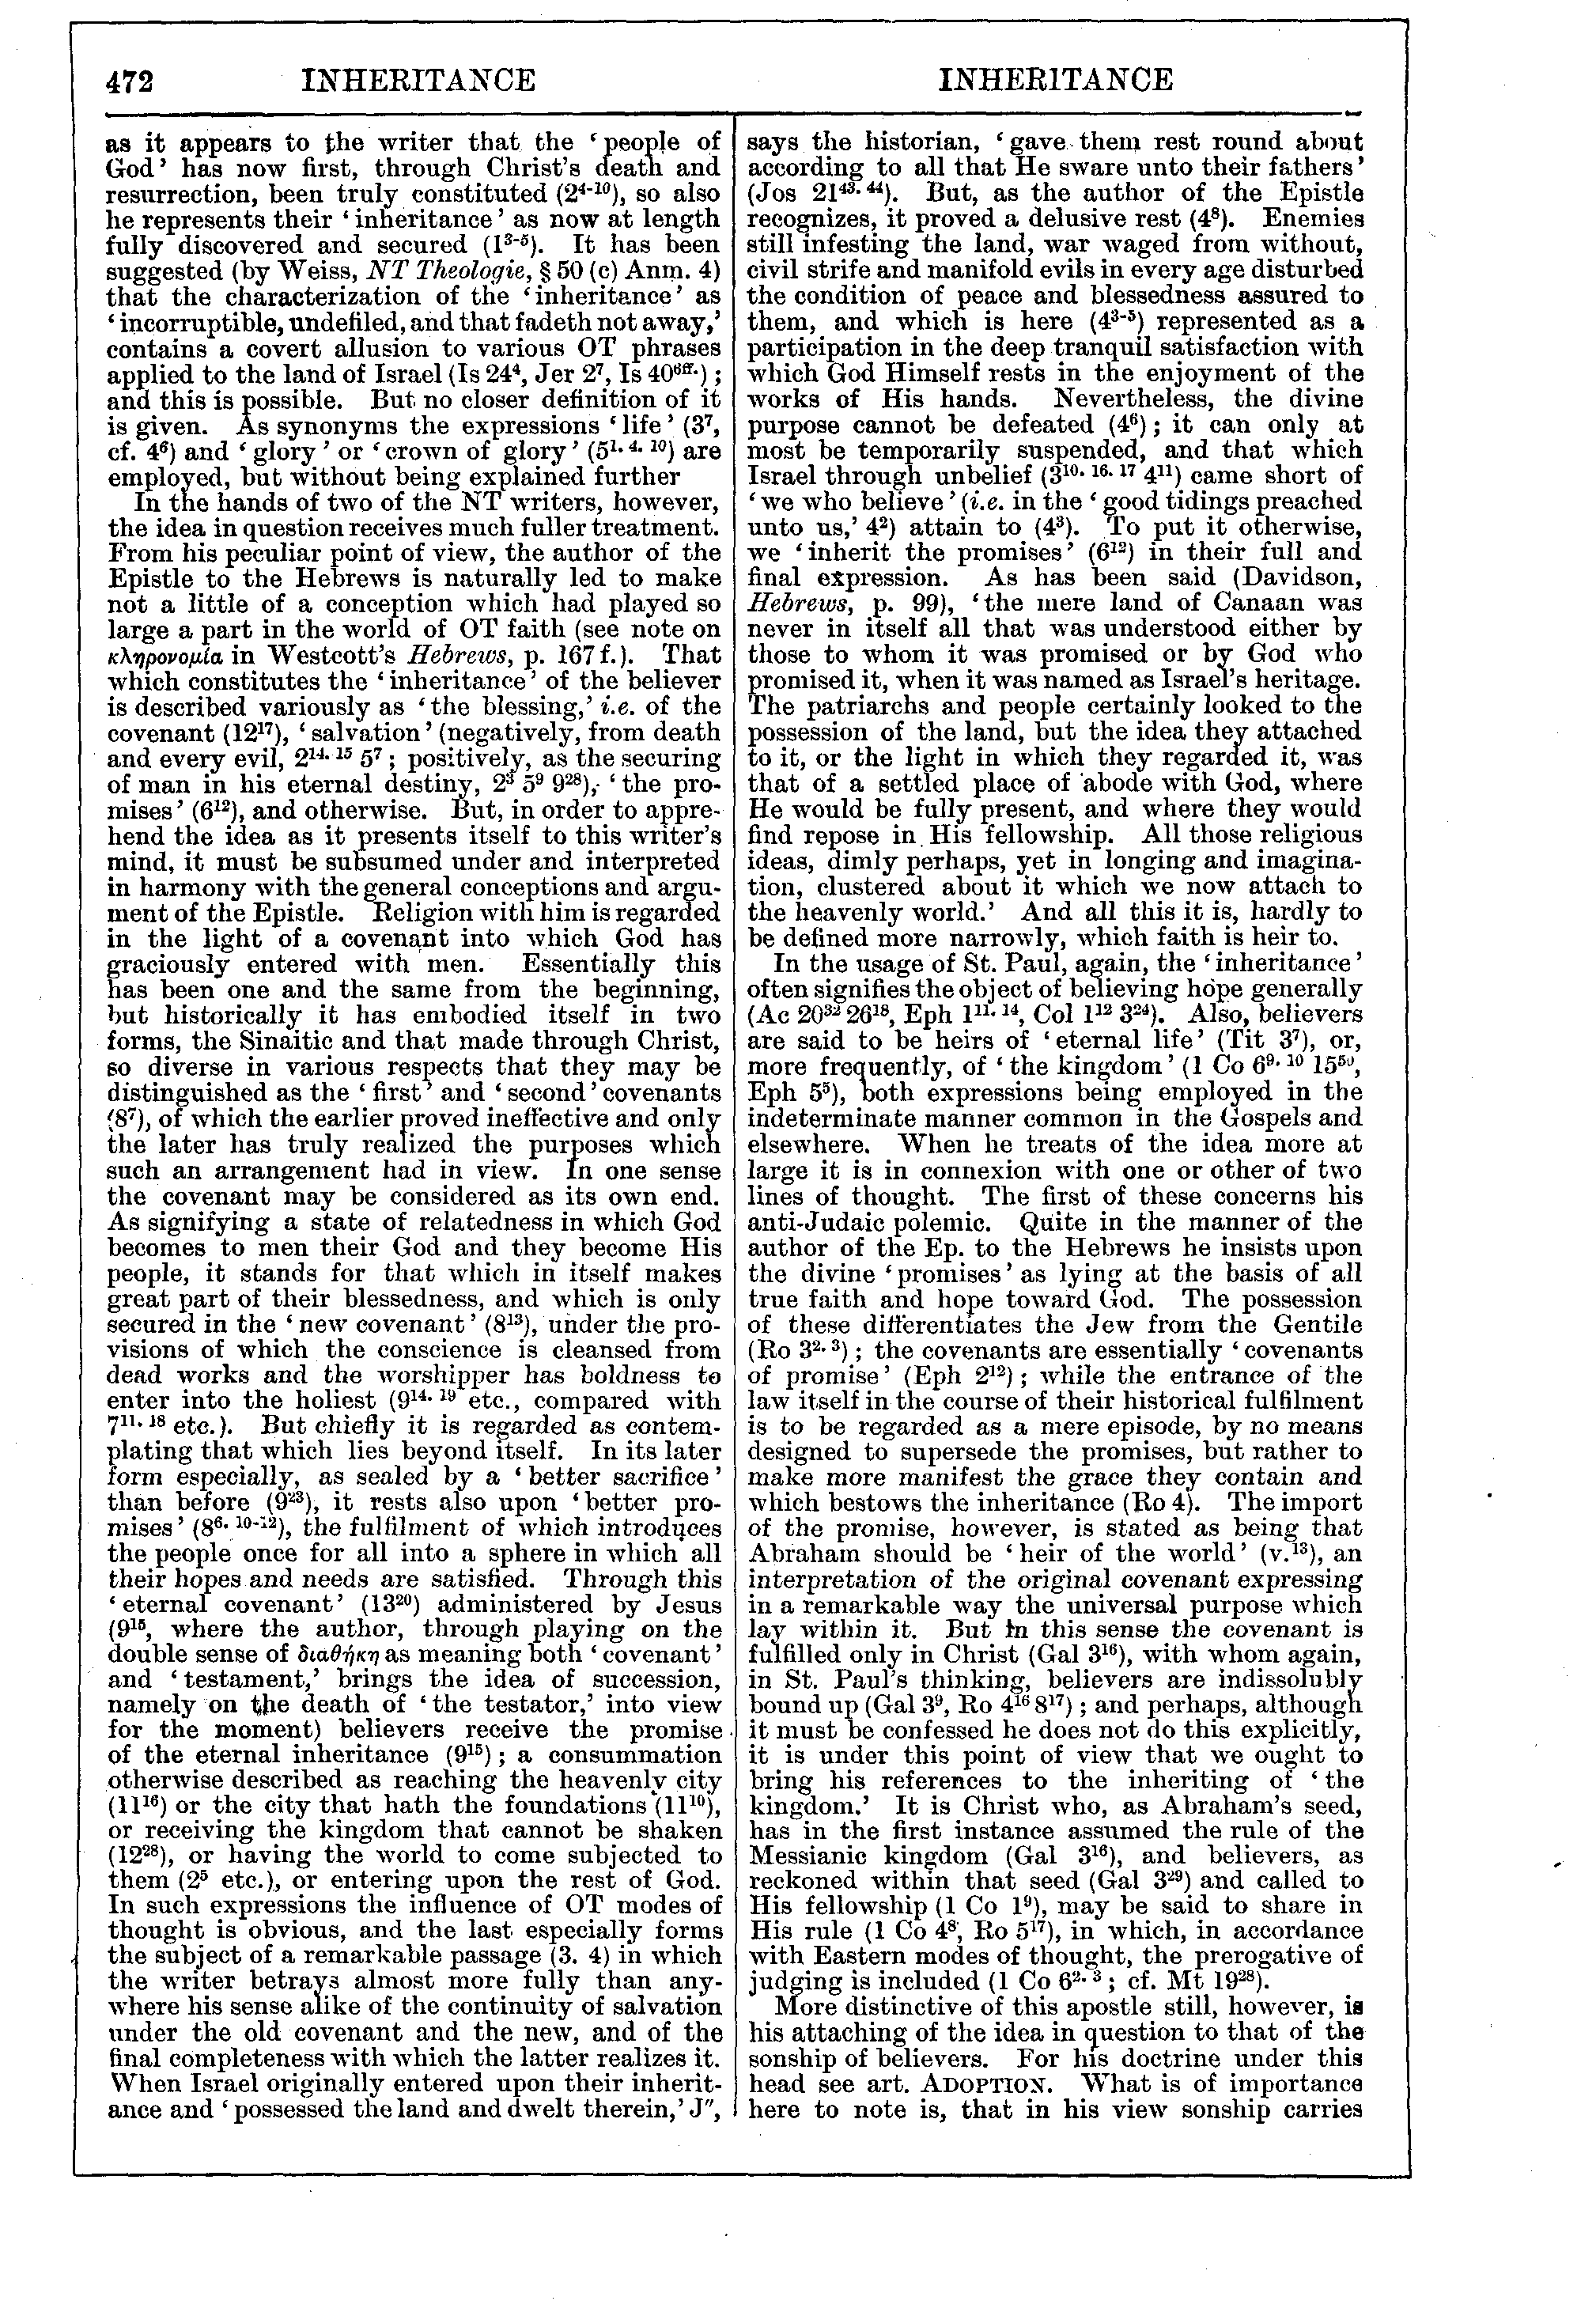 Image of page 472